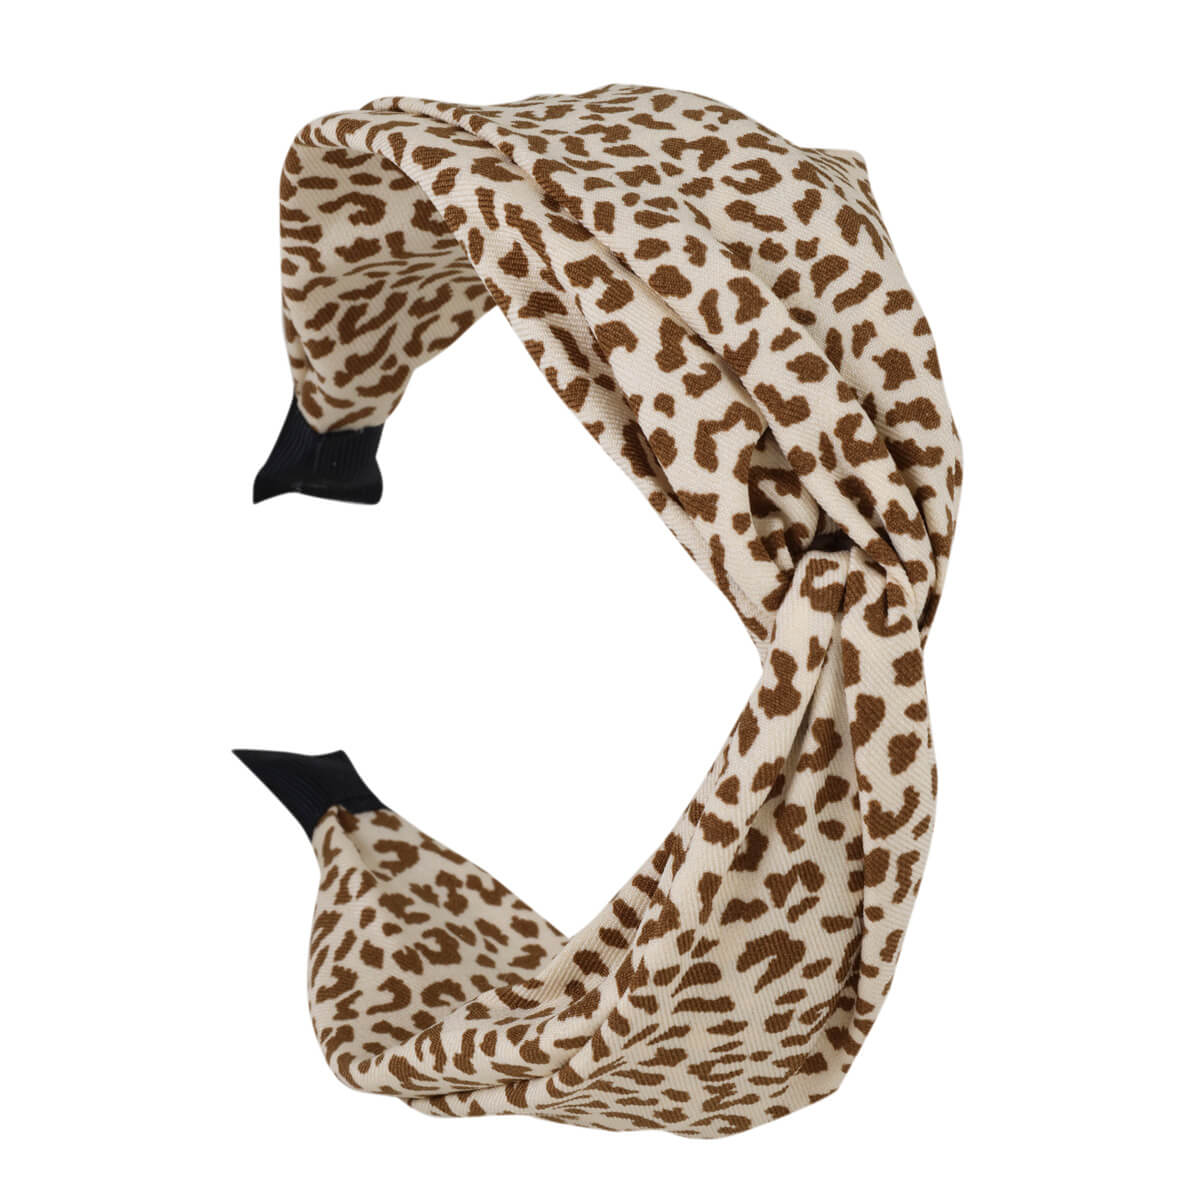 Wide spotted soft hair collar 7cm